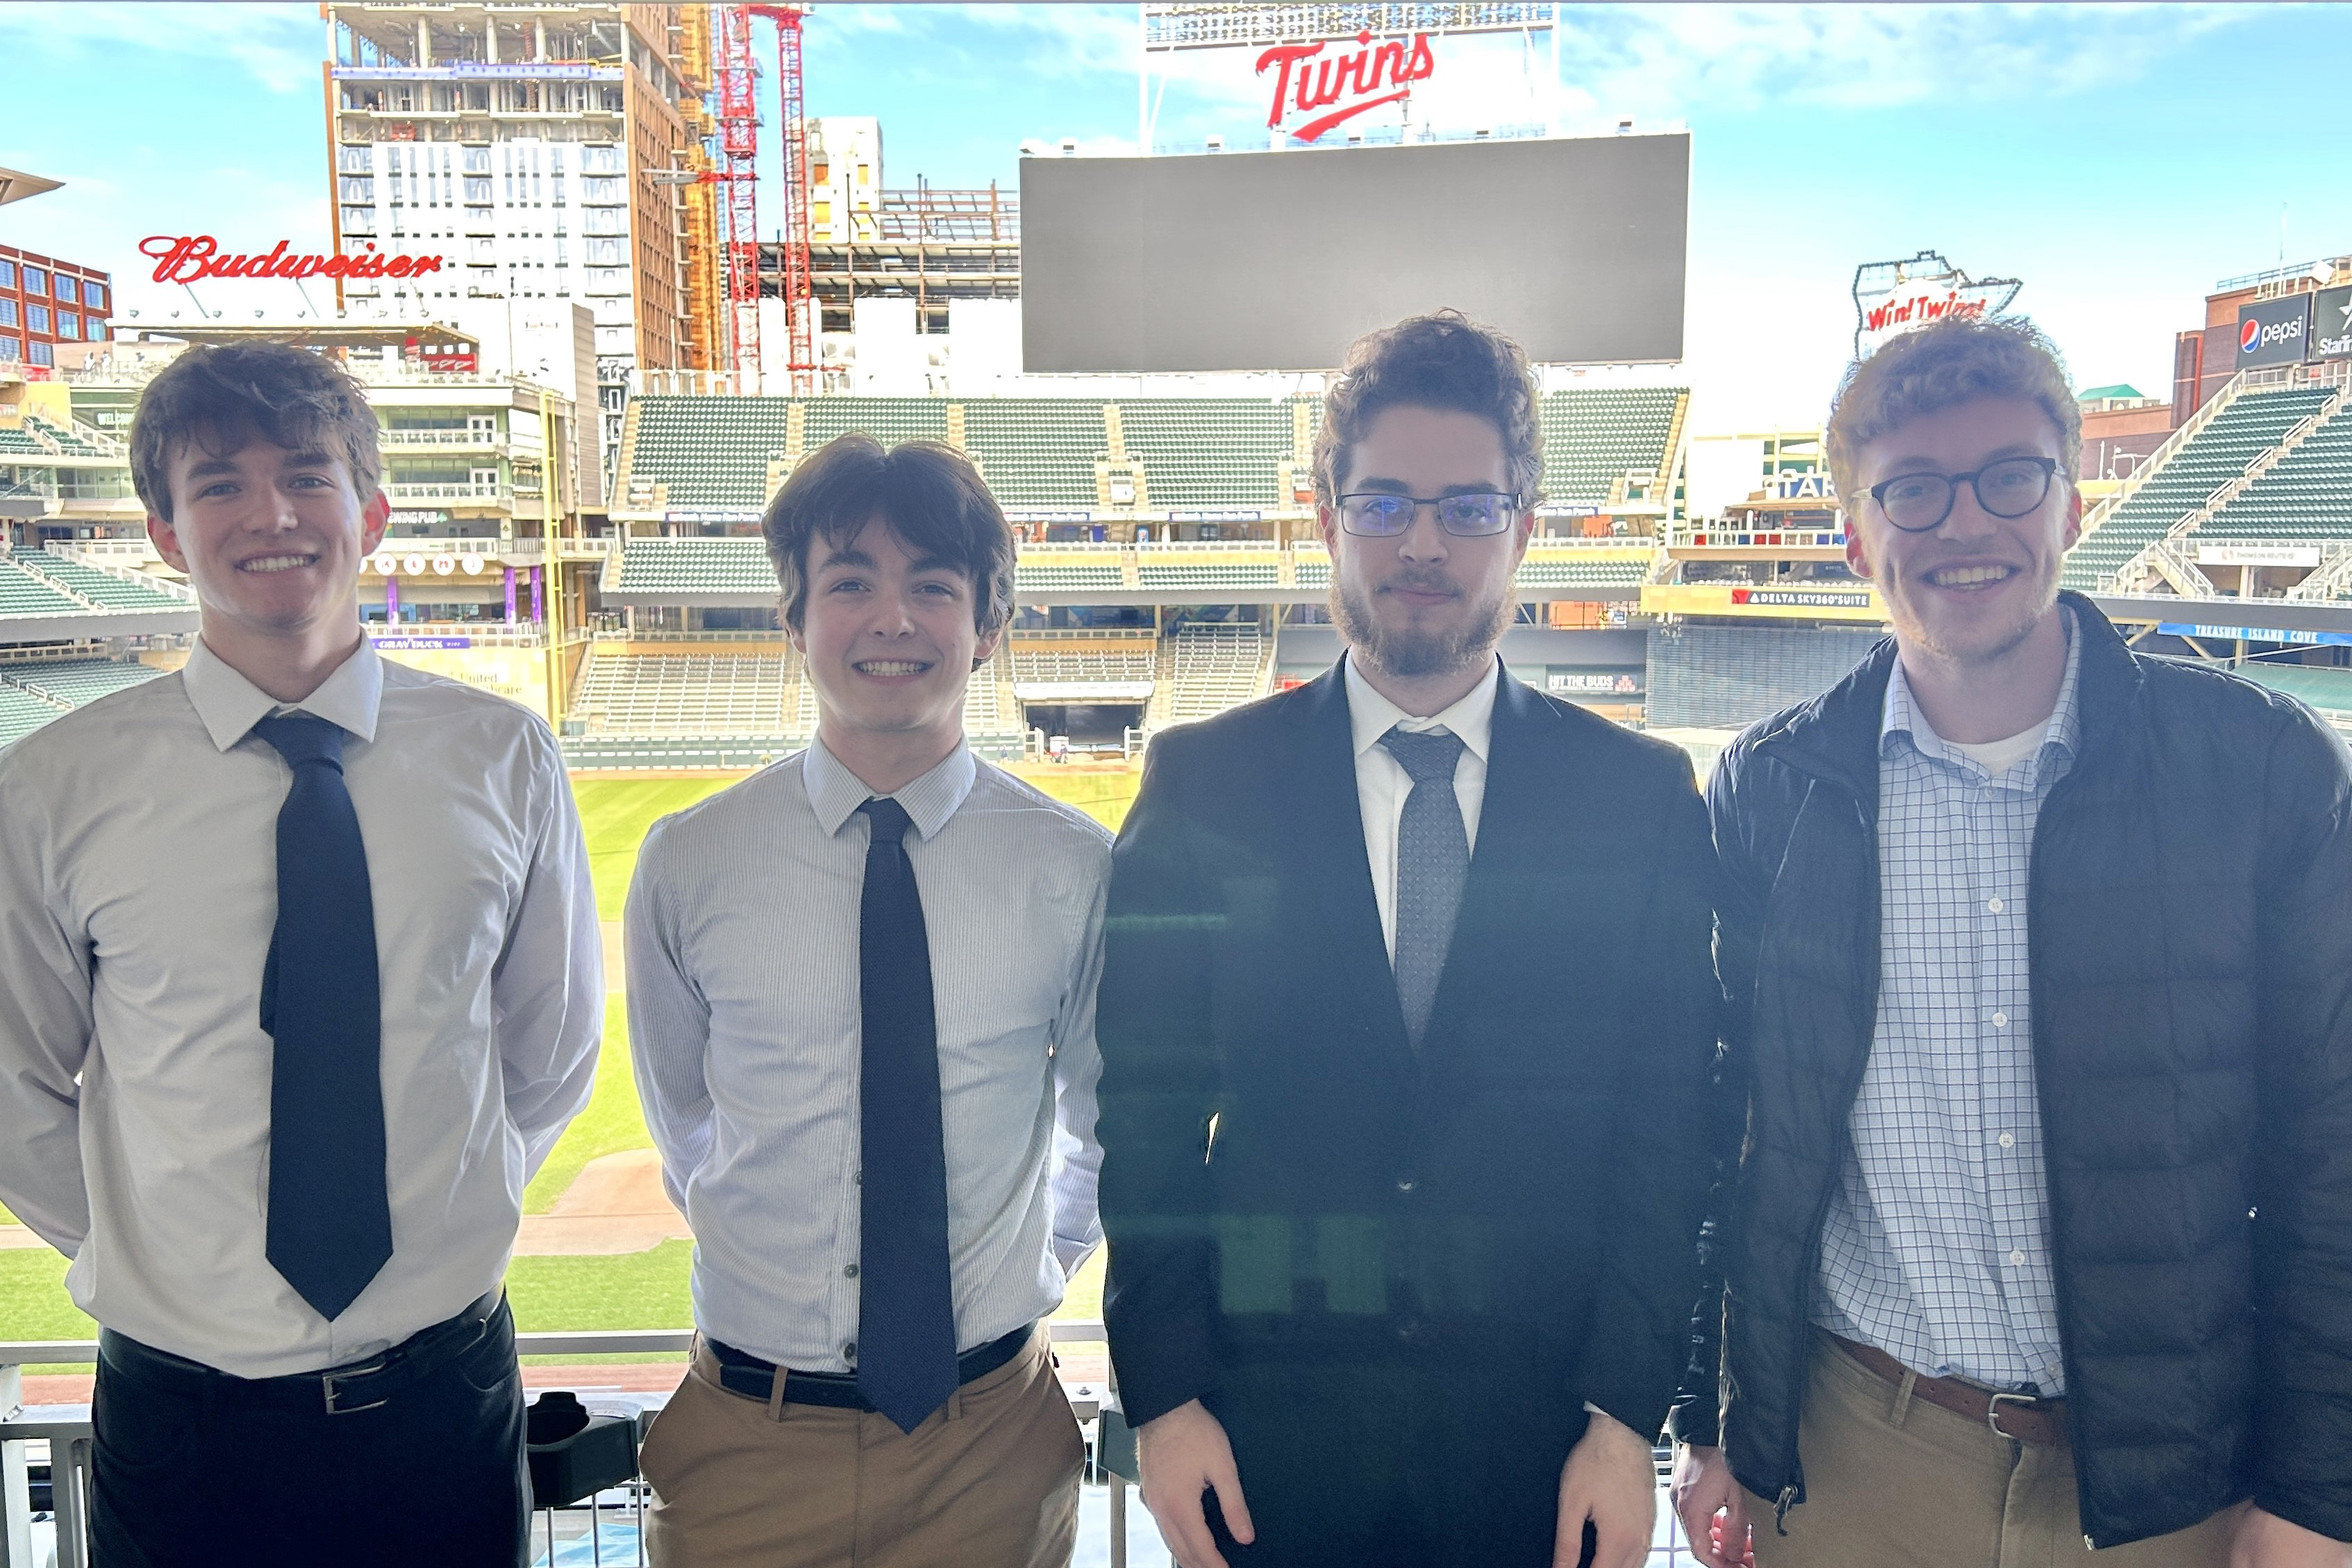 Kennedy Johnson, Charles Hart, Tom Bareket, and Jack Rogers pose together at Target Field